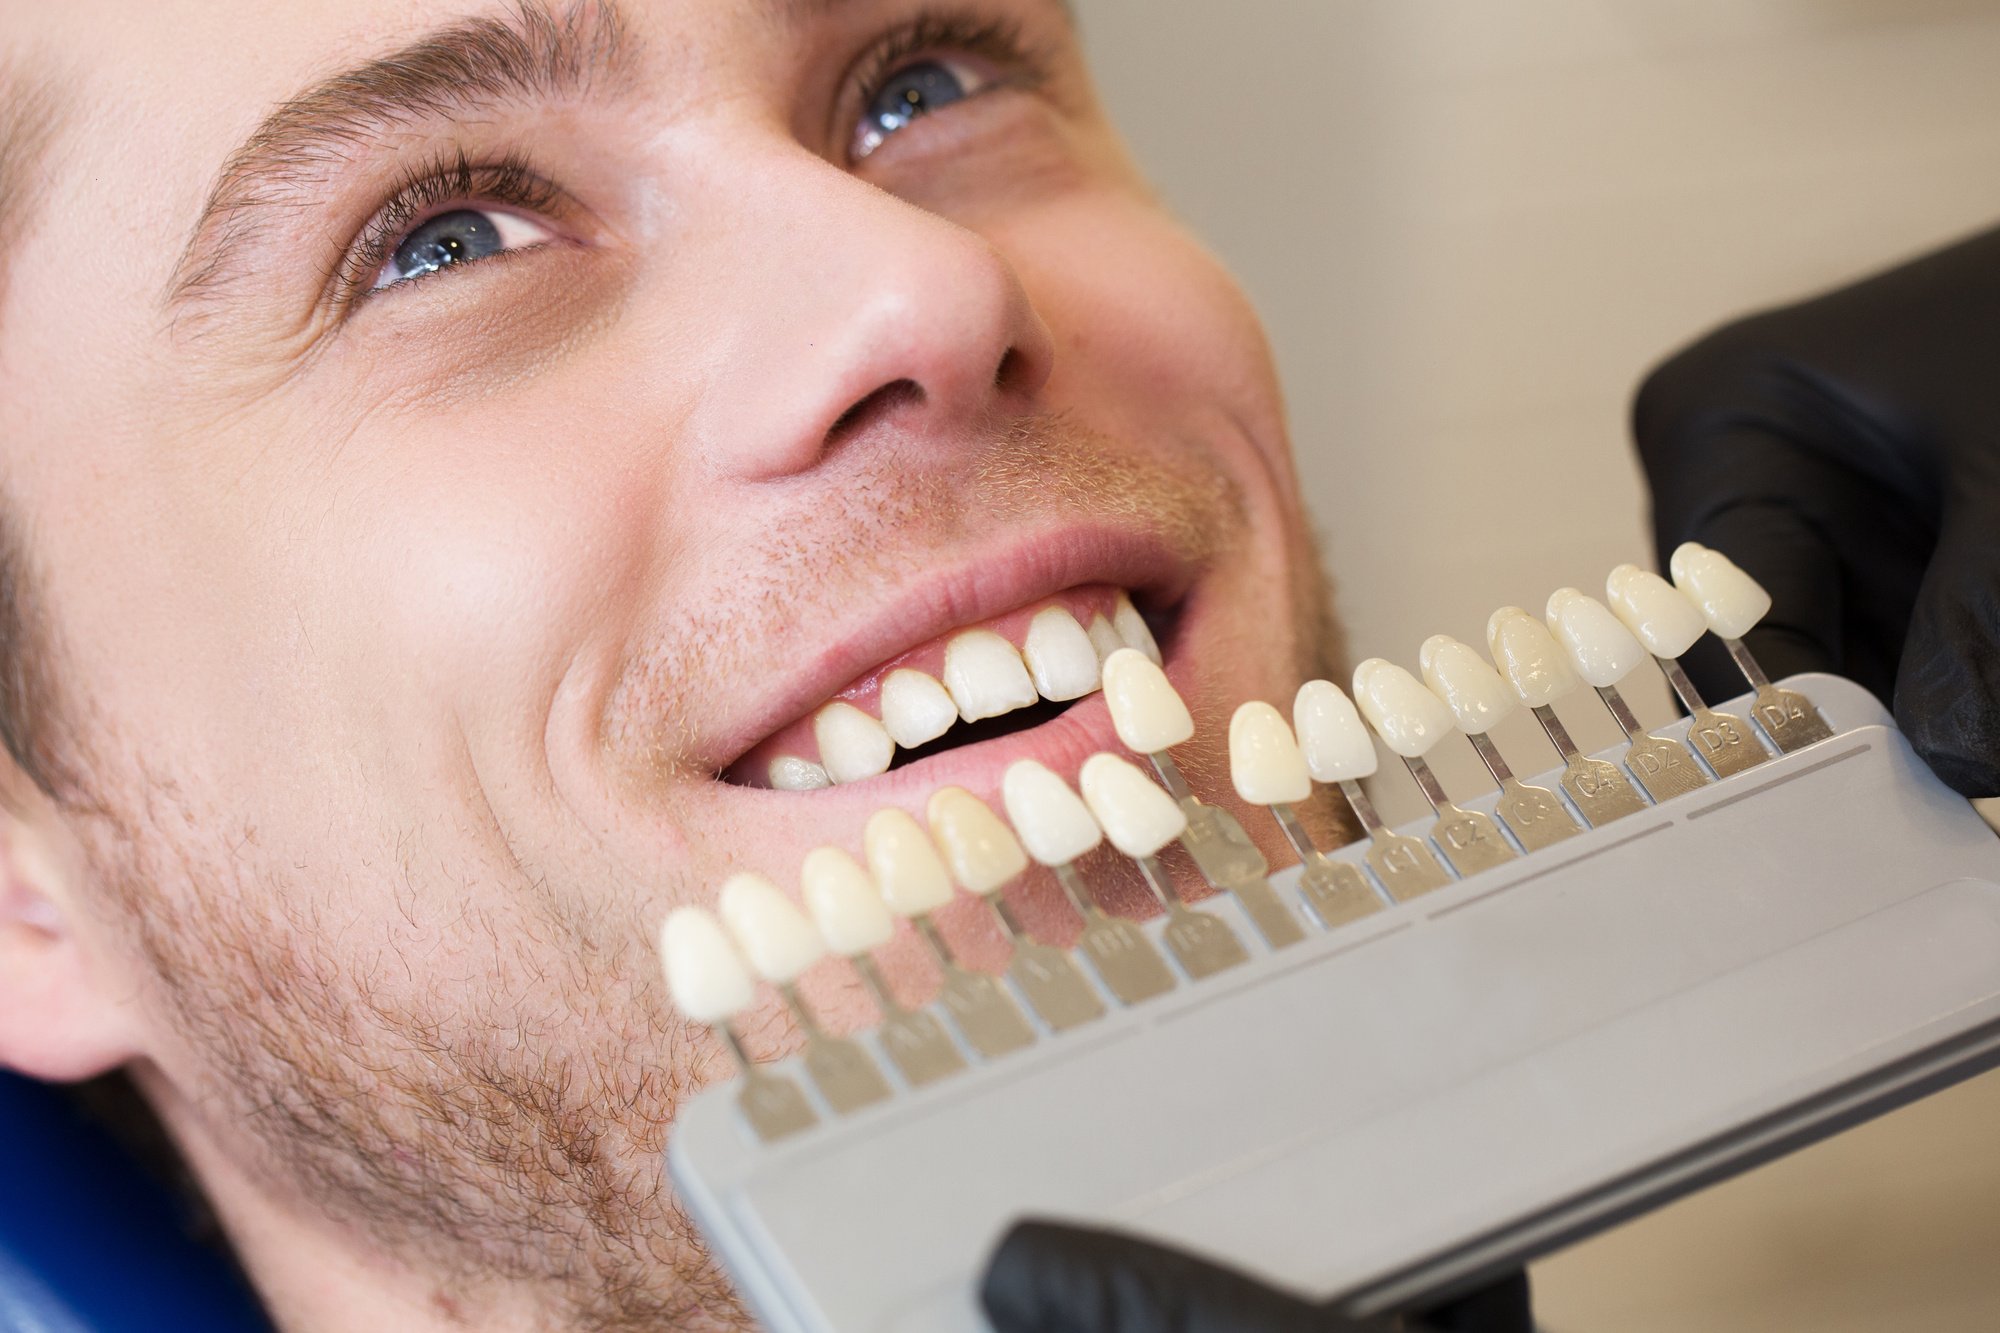 Dental Bridges vs Implants: What’s the Difference?